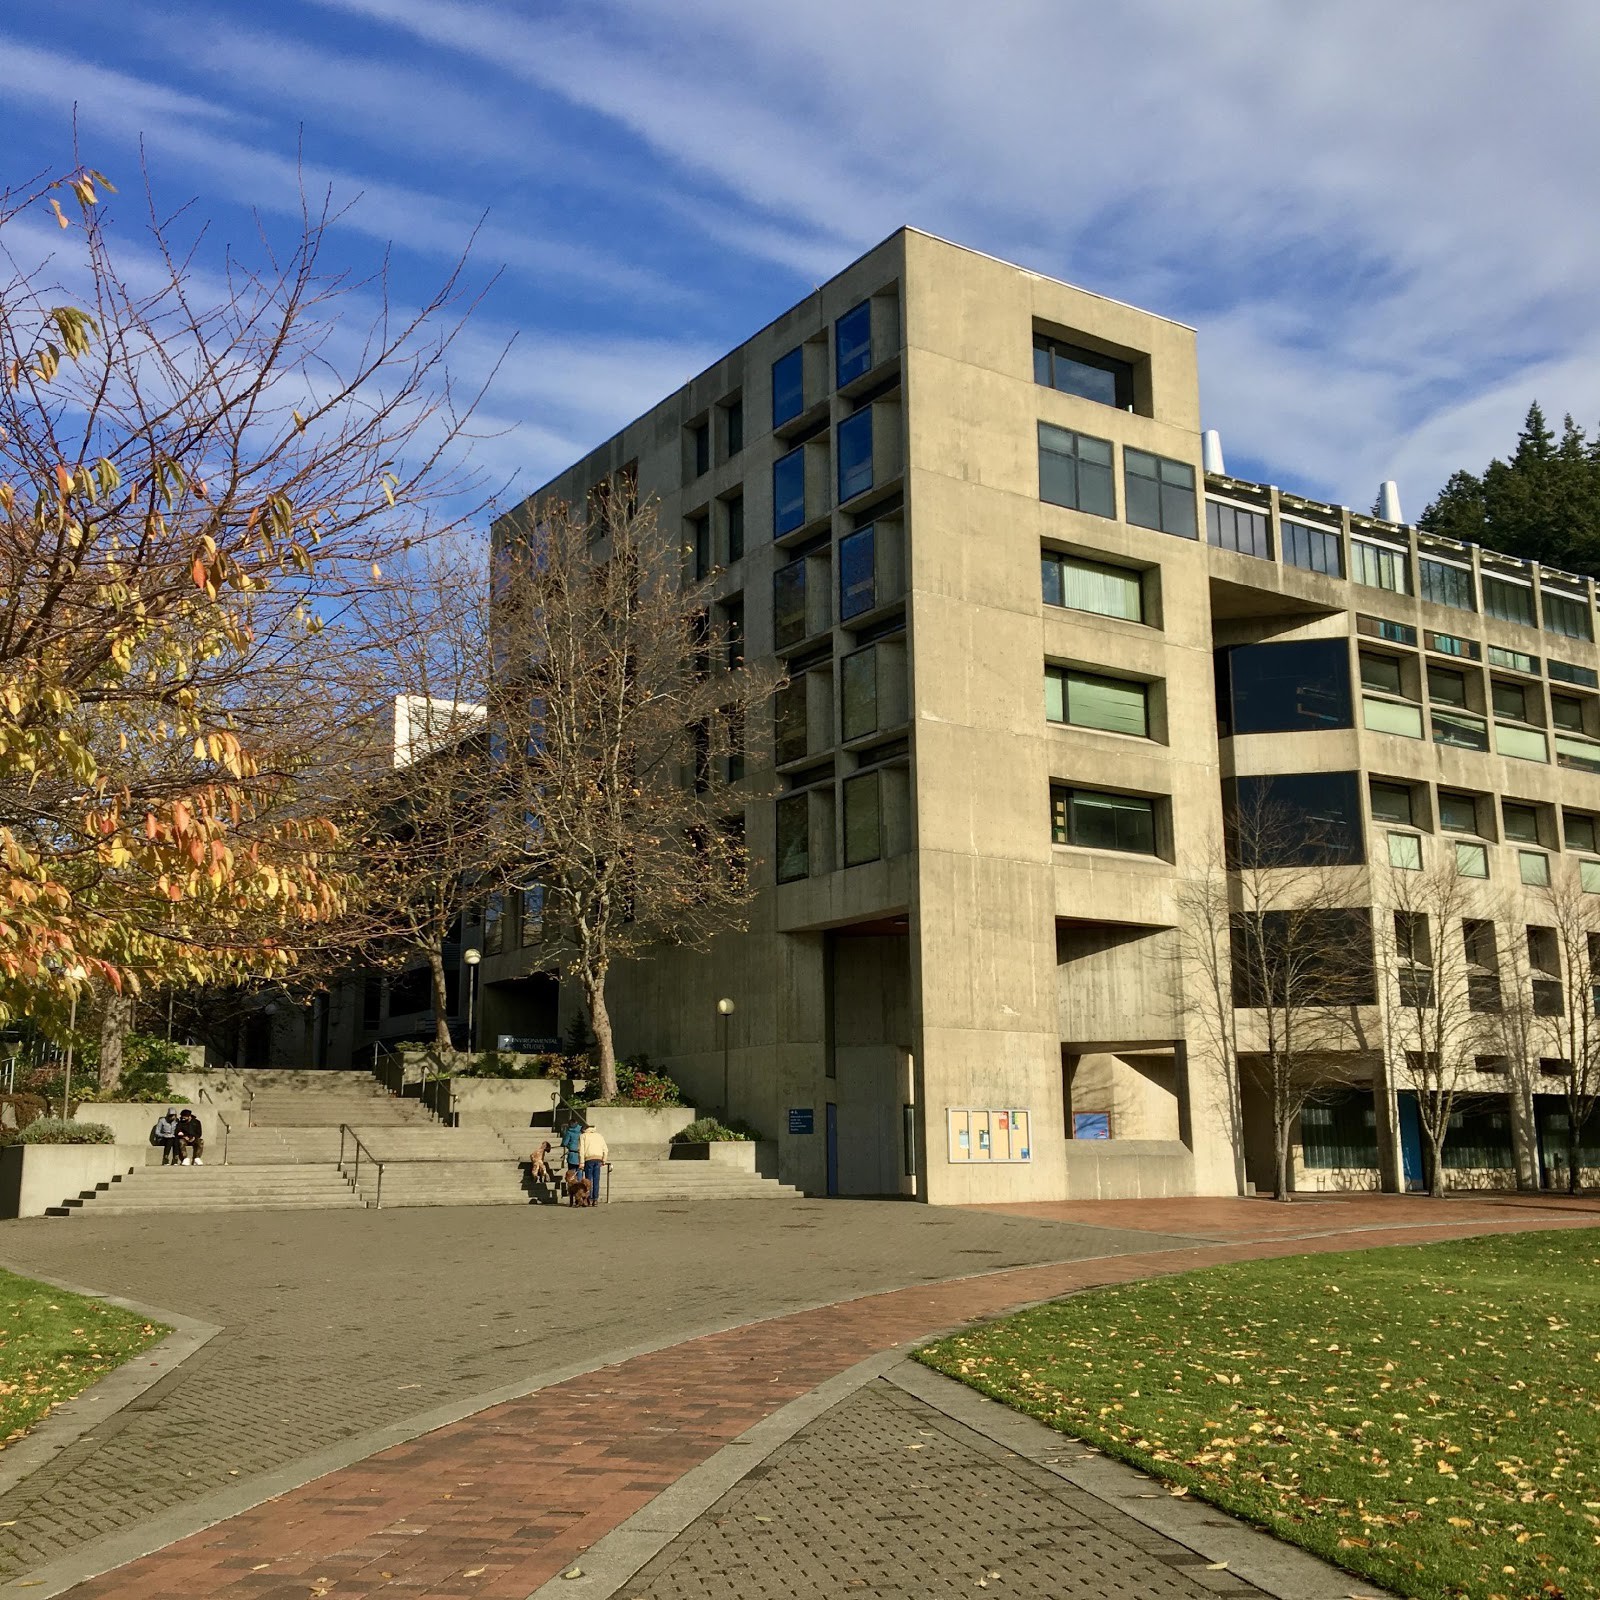 Photo of the Environmental Studies Building